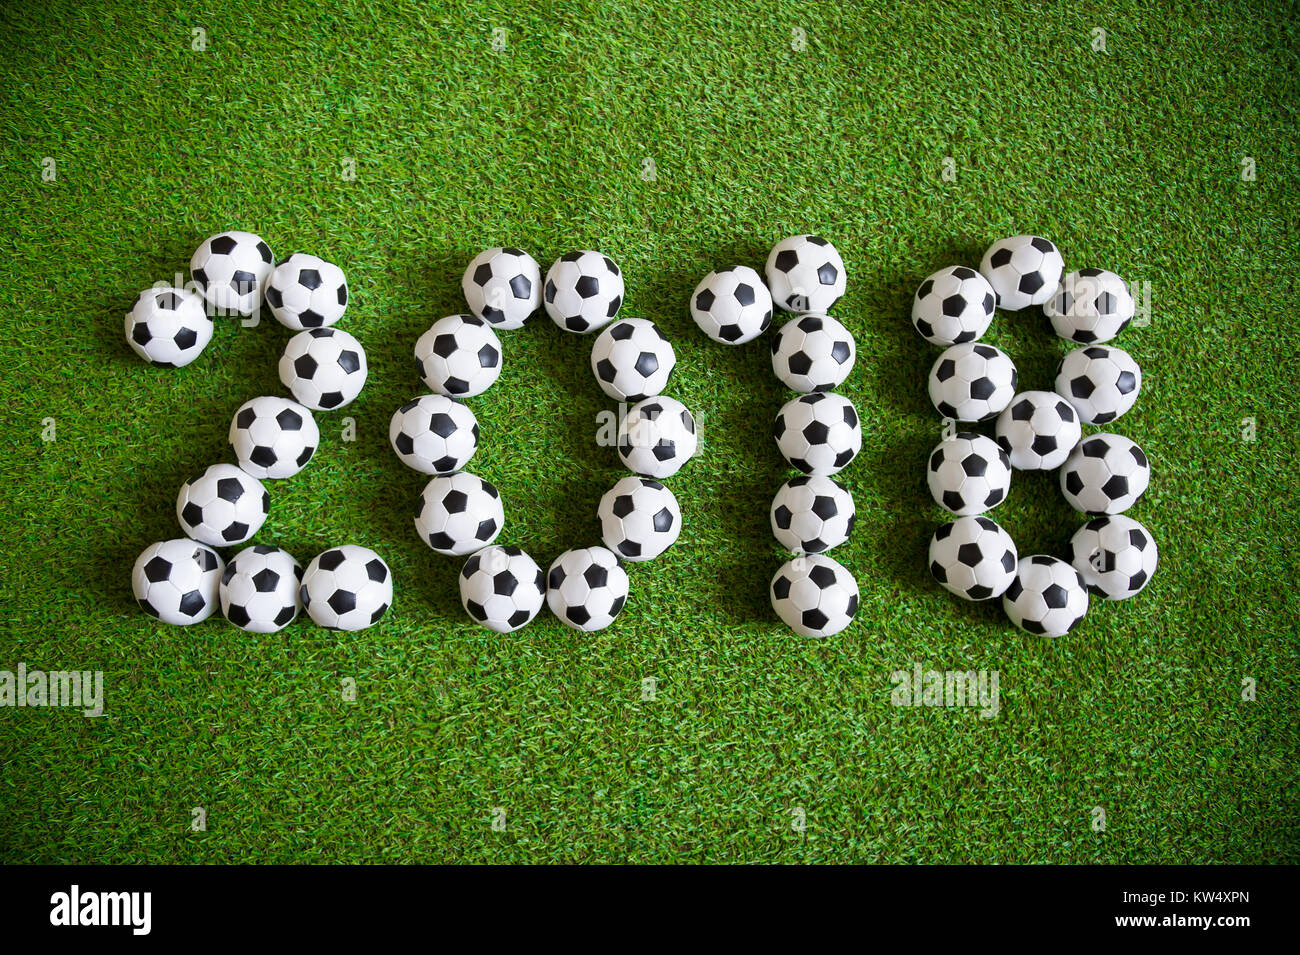 Message for new year 2018 formed from little balls on green football sports pitch Stock Photo